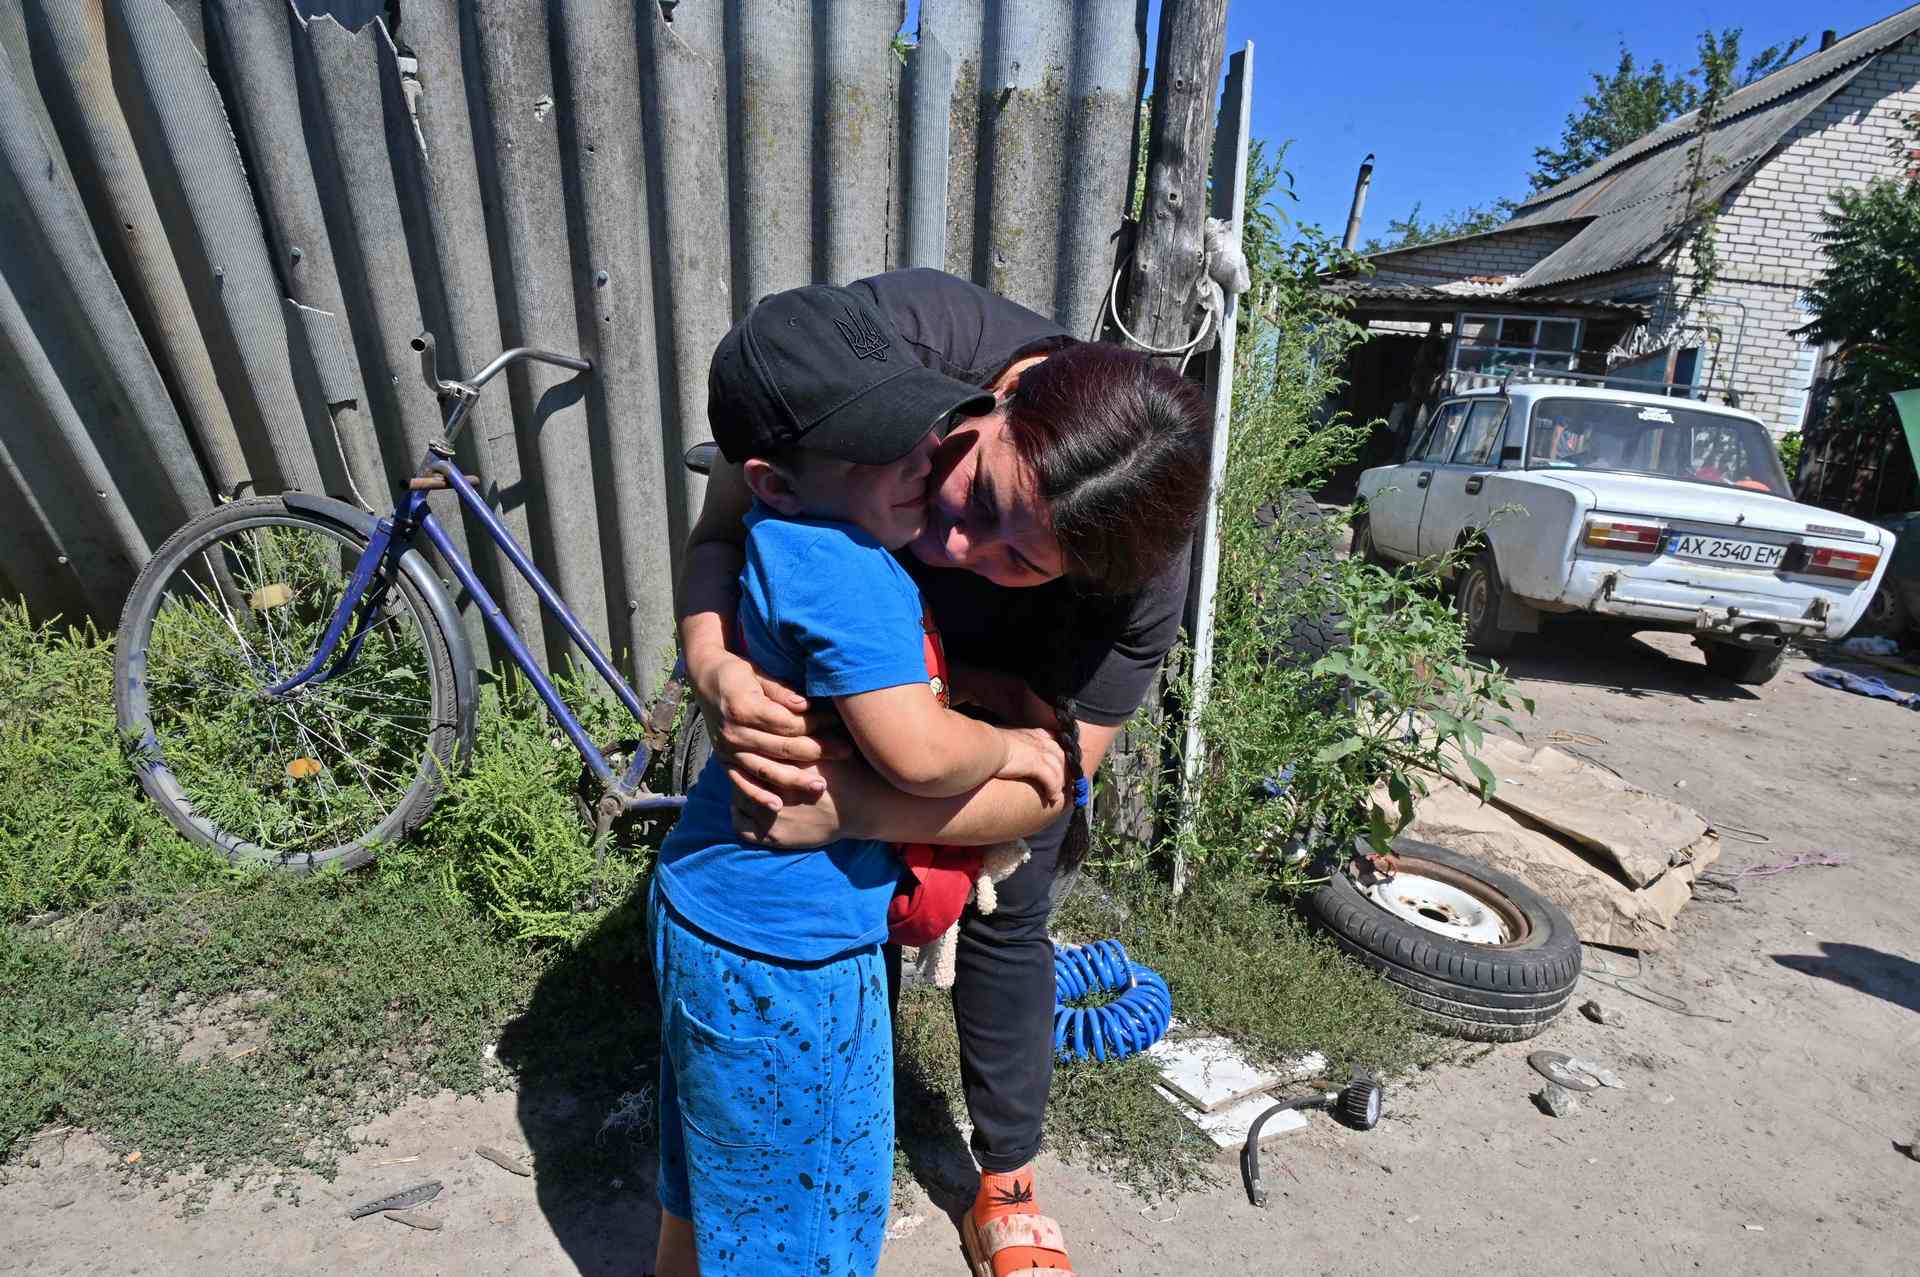 Lilia Bunescu says goodbye to her son, who is going to be evacuated from Kruglyakivka village, near Kupiansk